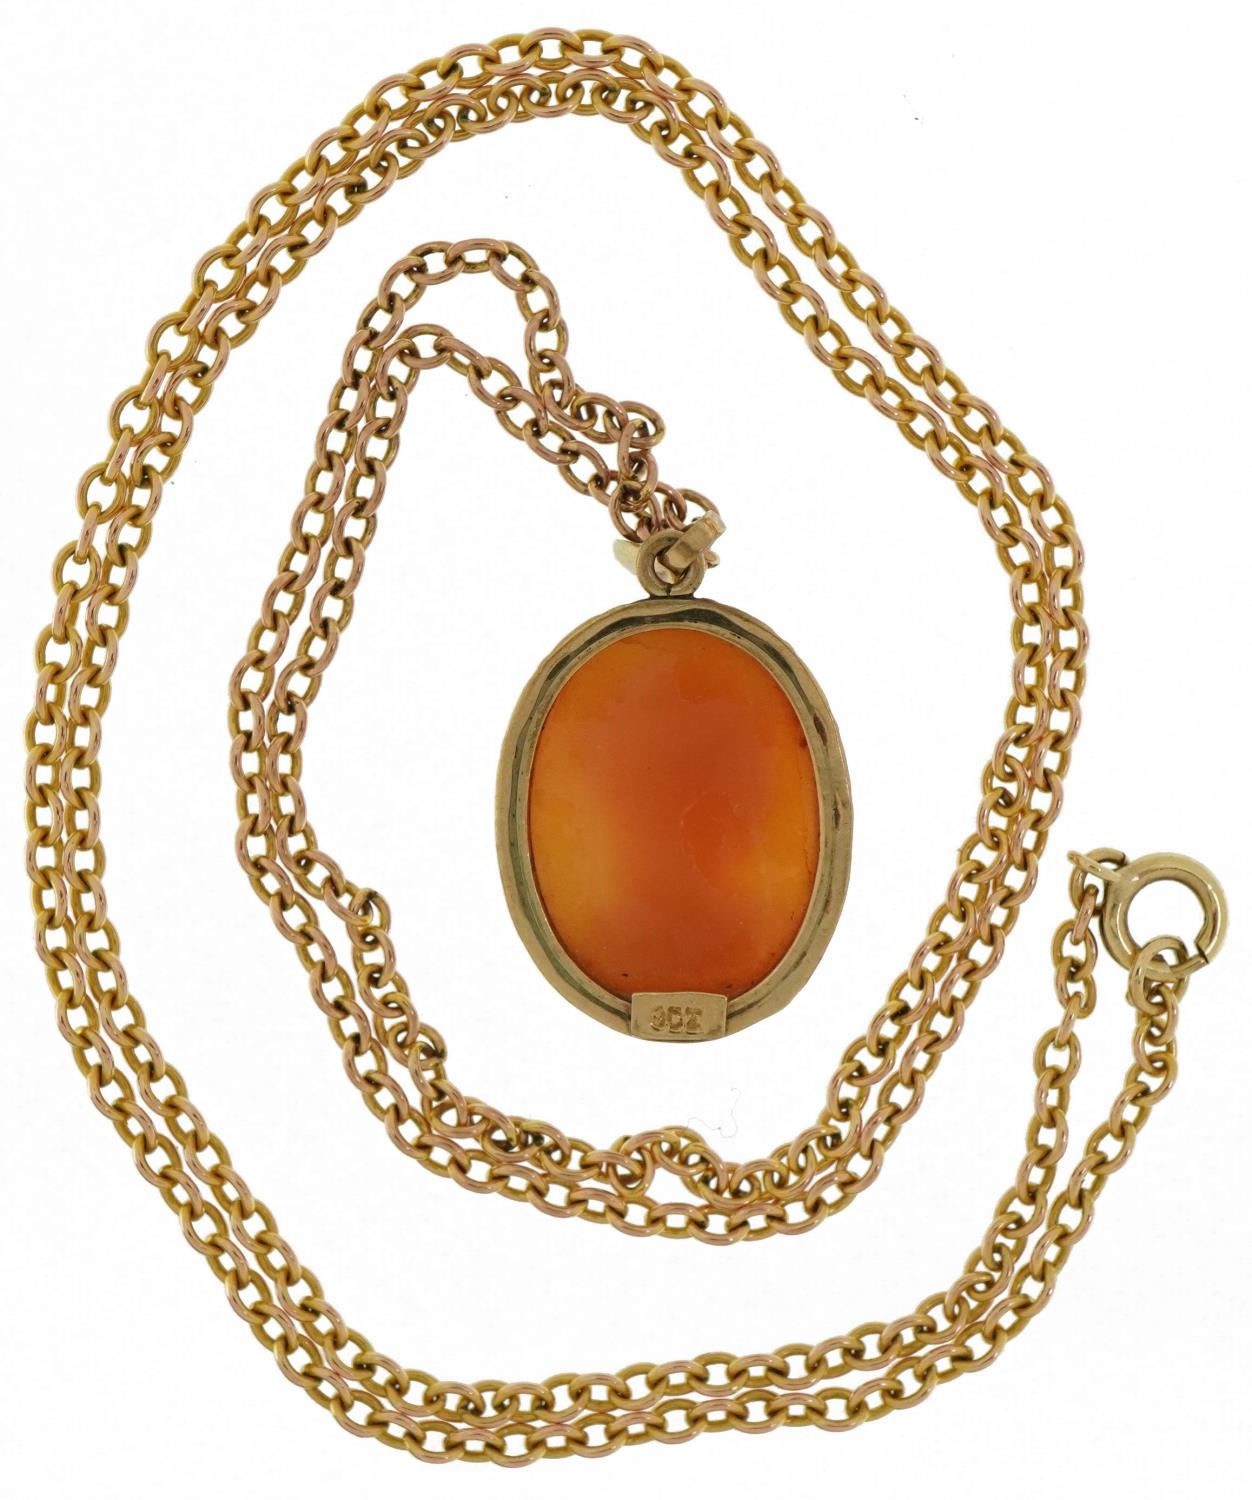 9ct gold mounted cameo maiden head pendant on 9ct gold Belcher link necklace, 3.0cm high and 60cm in - Image 3 of 4